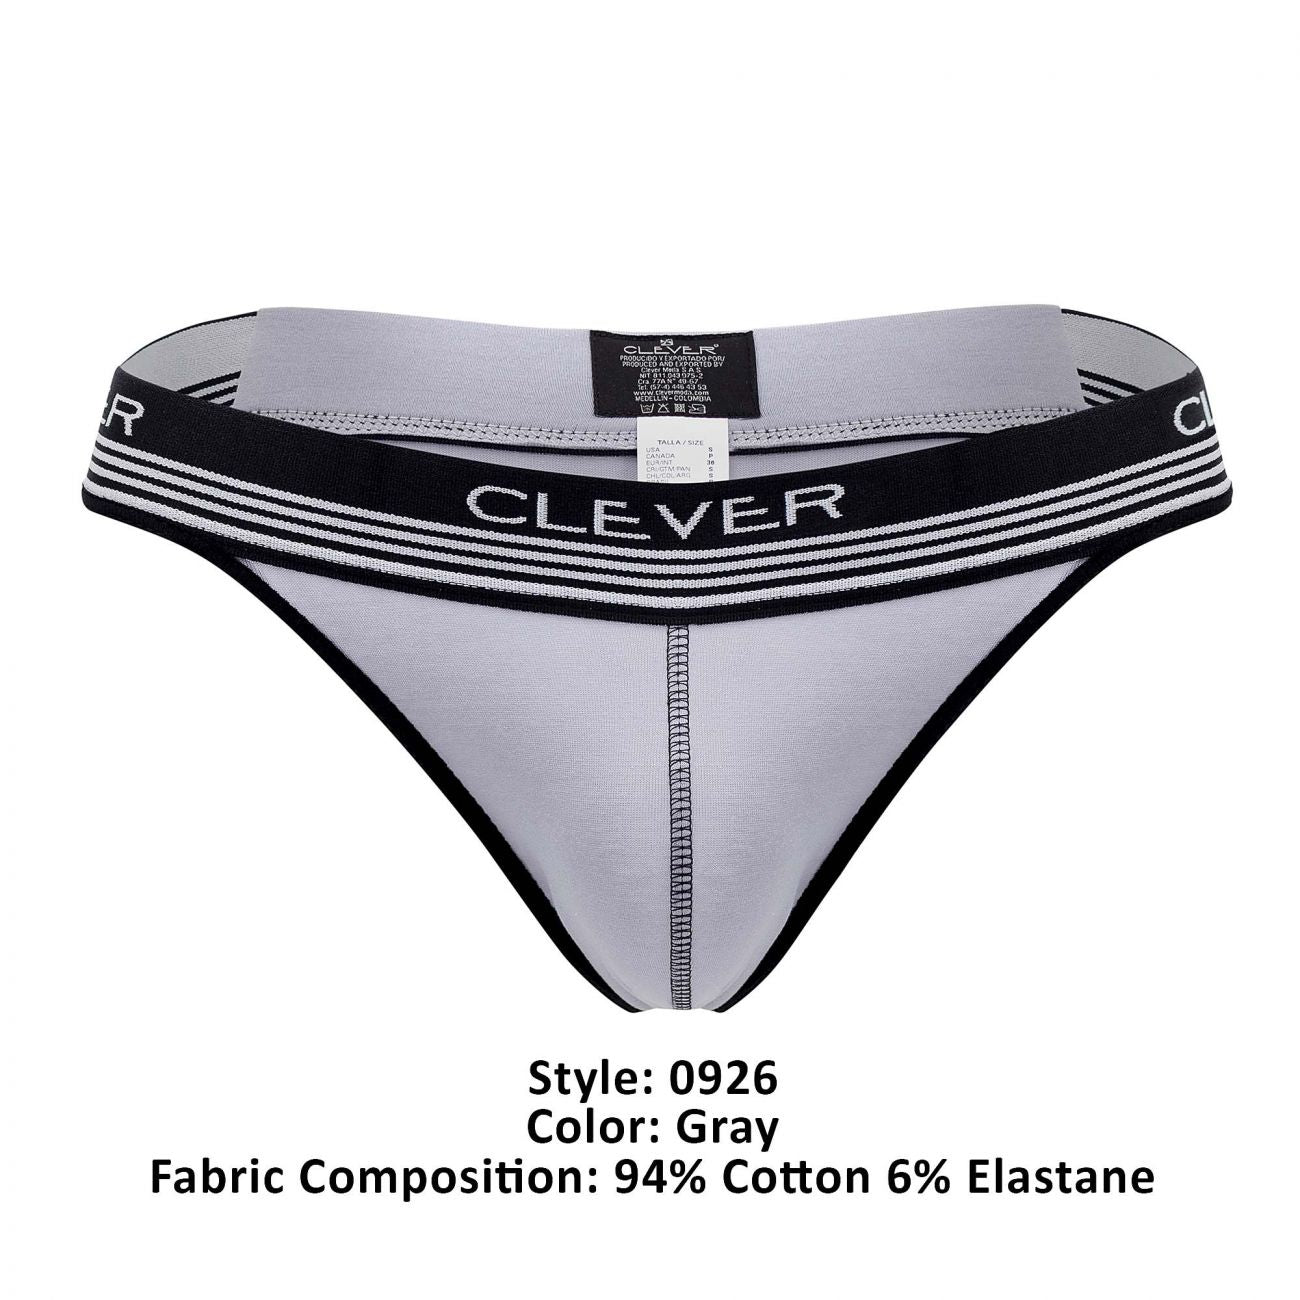 Clever Comfy Thongs